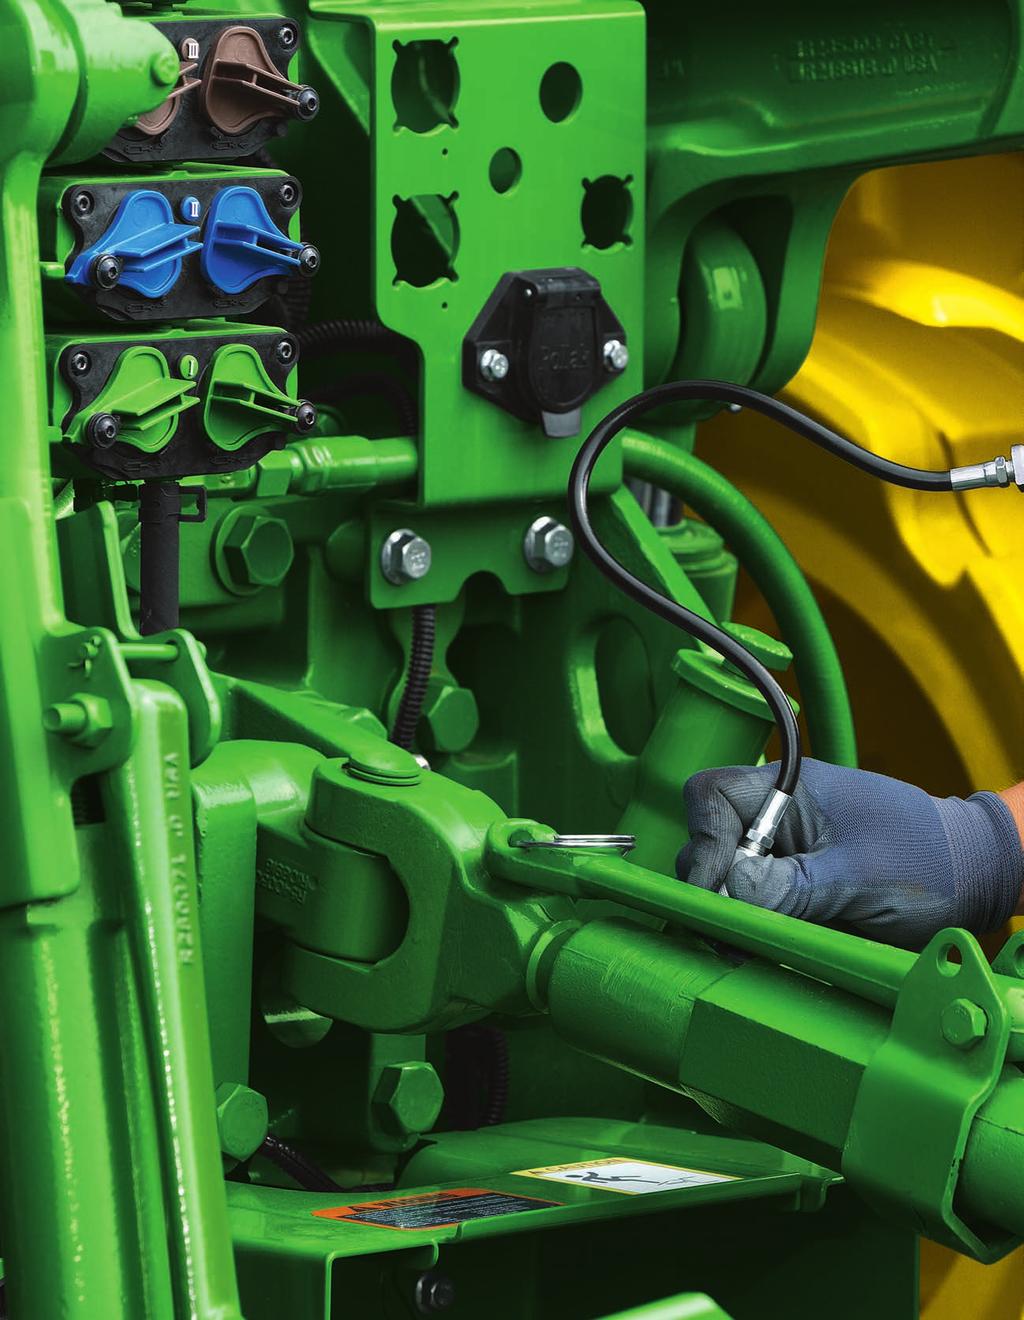 Additional Tractor Services: Code Scan Update Control $49.